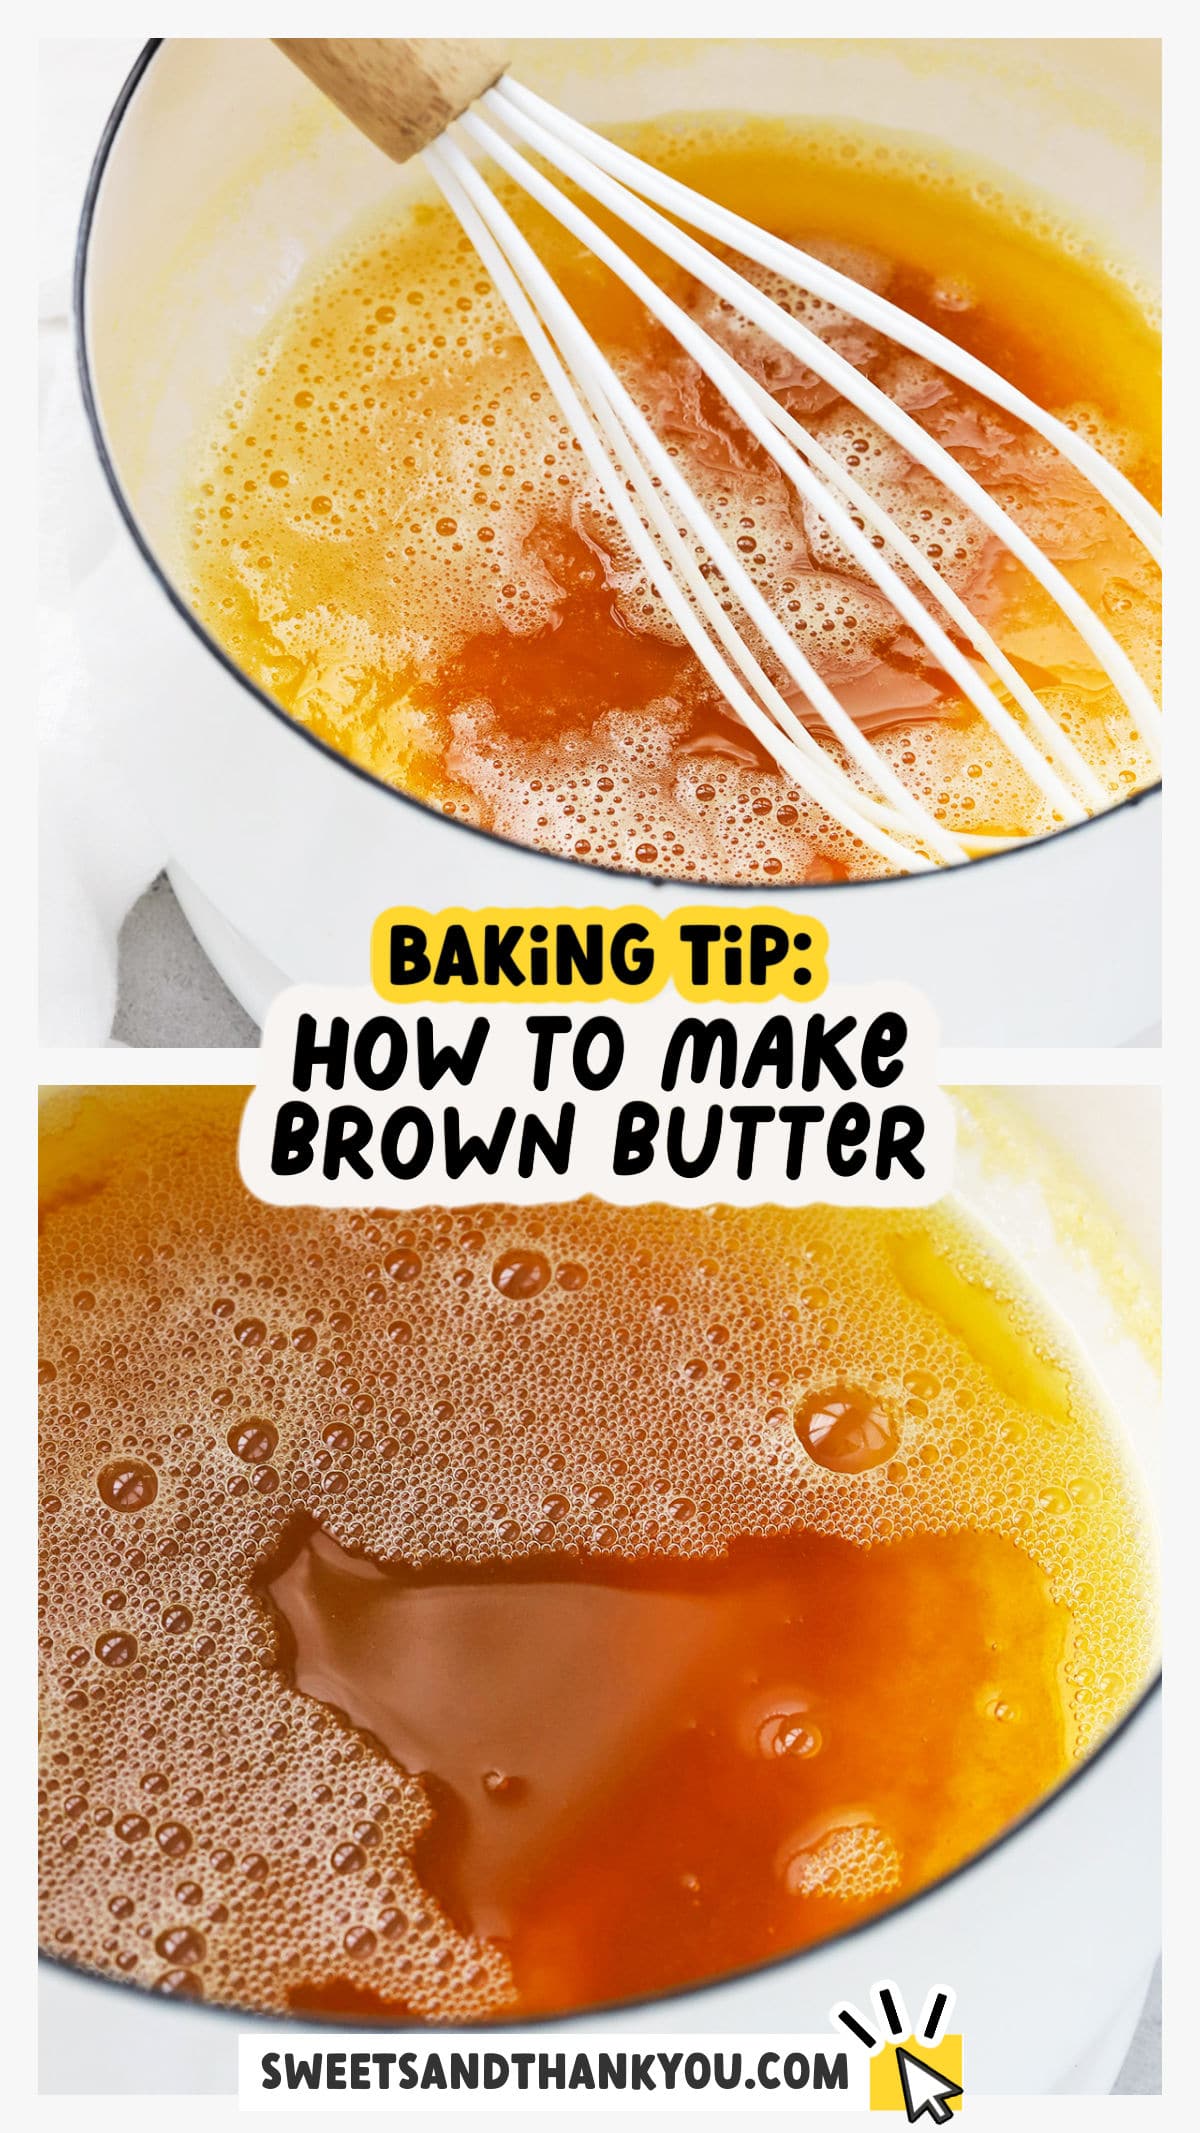 Let's learn how to brown butter! If you've ever wondered how to make brown butter, you're in luck! It's EASY and adds gorgeous flavor to so many recipes. This step-by-step tutorial will walk you through every step of the process. Try it in cookies, brownies, frosting, rice krispie treats, and more!